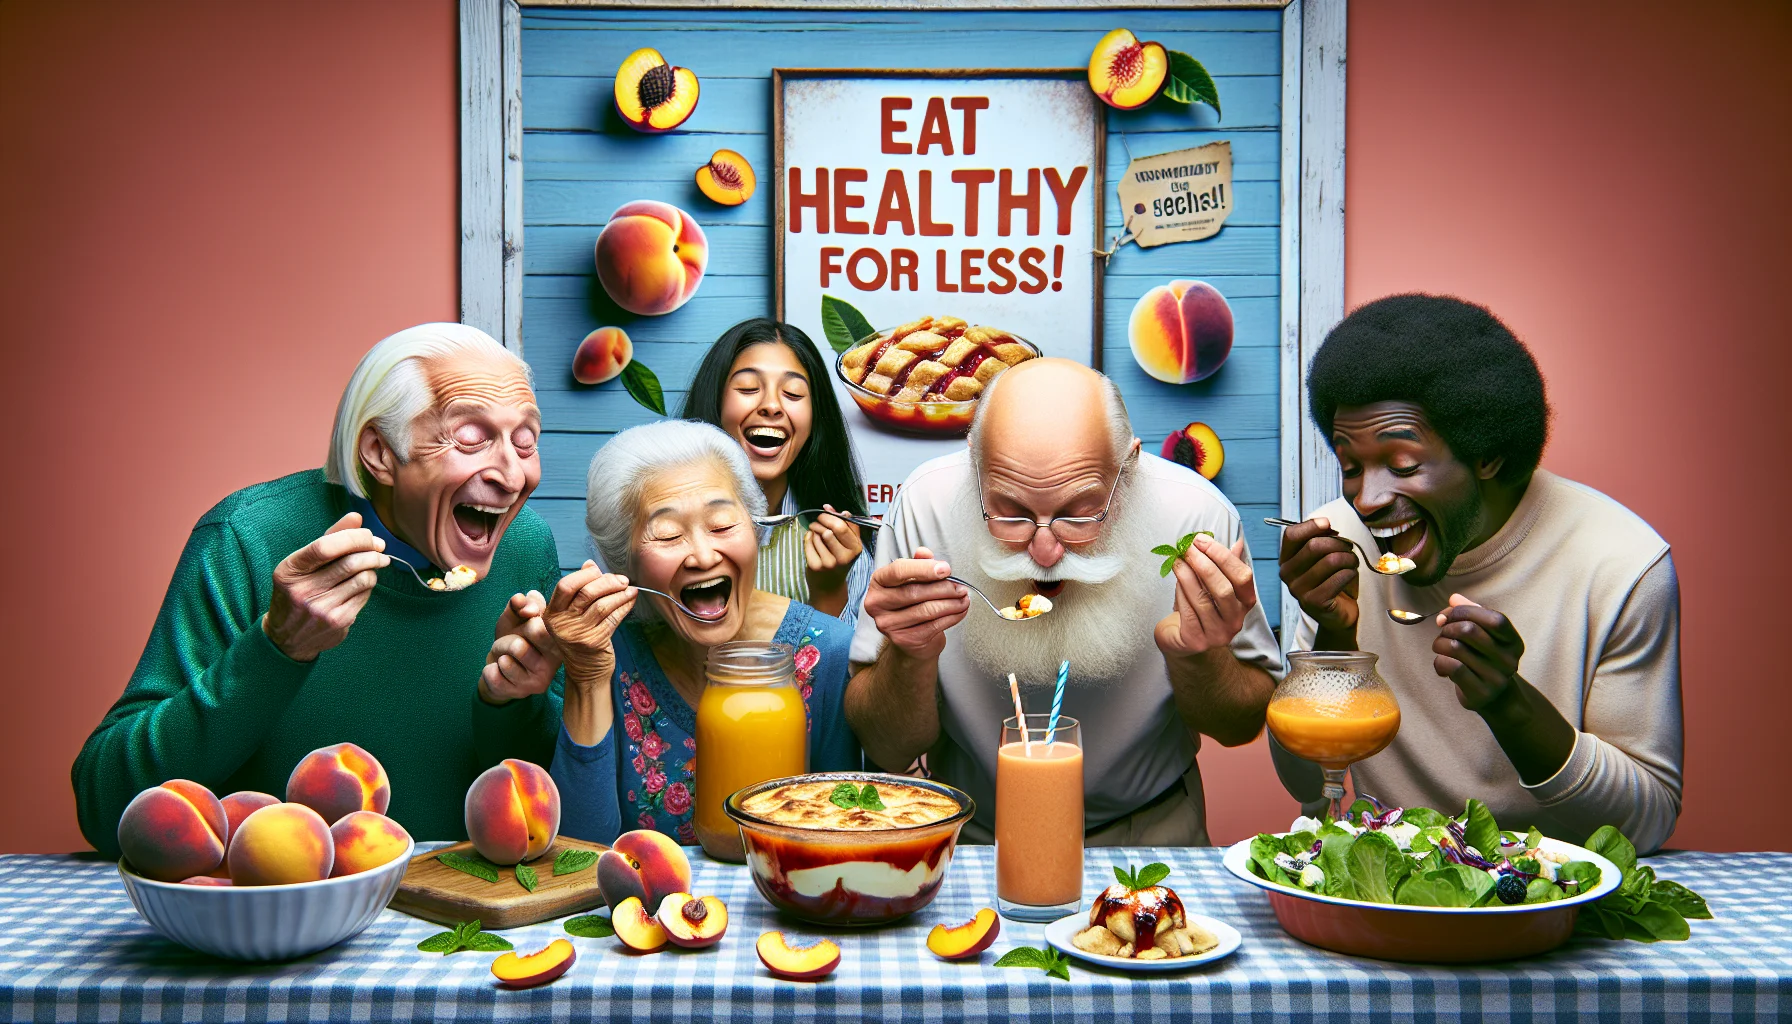 Create an image presenting various enjoyable and appetizing peach recipes. The dishes include a peach cobbler, a peach smoothie and a fresh peach salad. The scene is humorous, showing a group of four diverse people: an elderly Caucasian man, a young Black woman, a middle-aged Hispanic man and a South Asian child, all in different hilarious poses showcasing their excitement and delight while tasting the dishes. The backdrop is an attractively designed poster saying 'Eat Healthy for Less!' suggesting economically viable healthy eating.